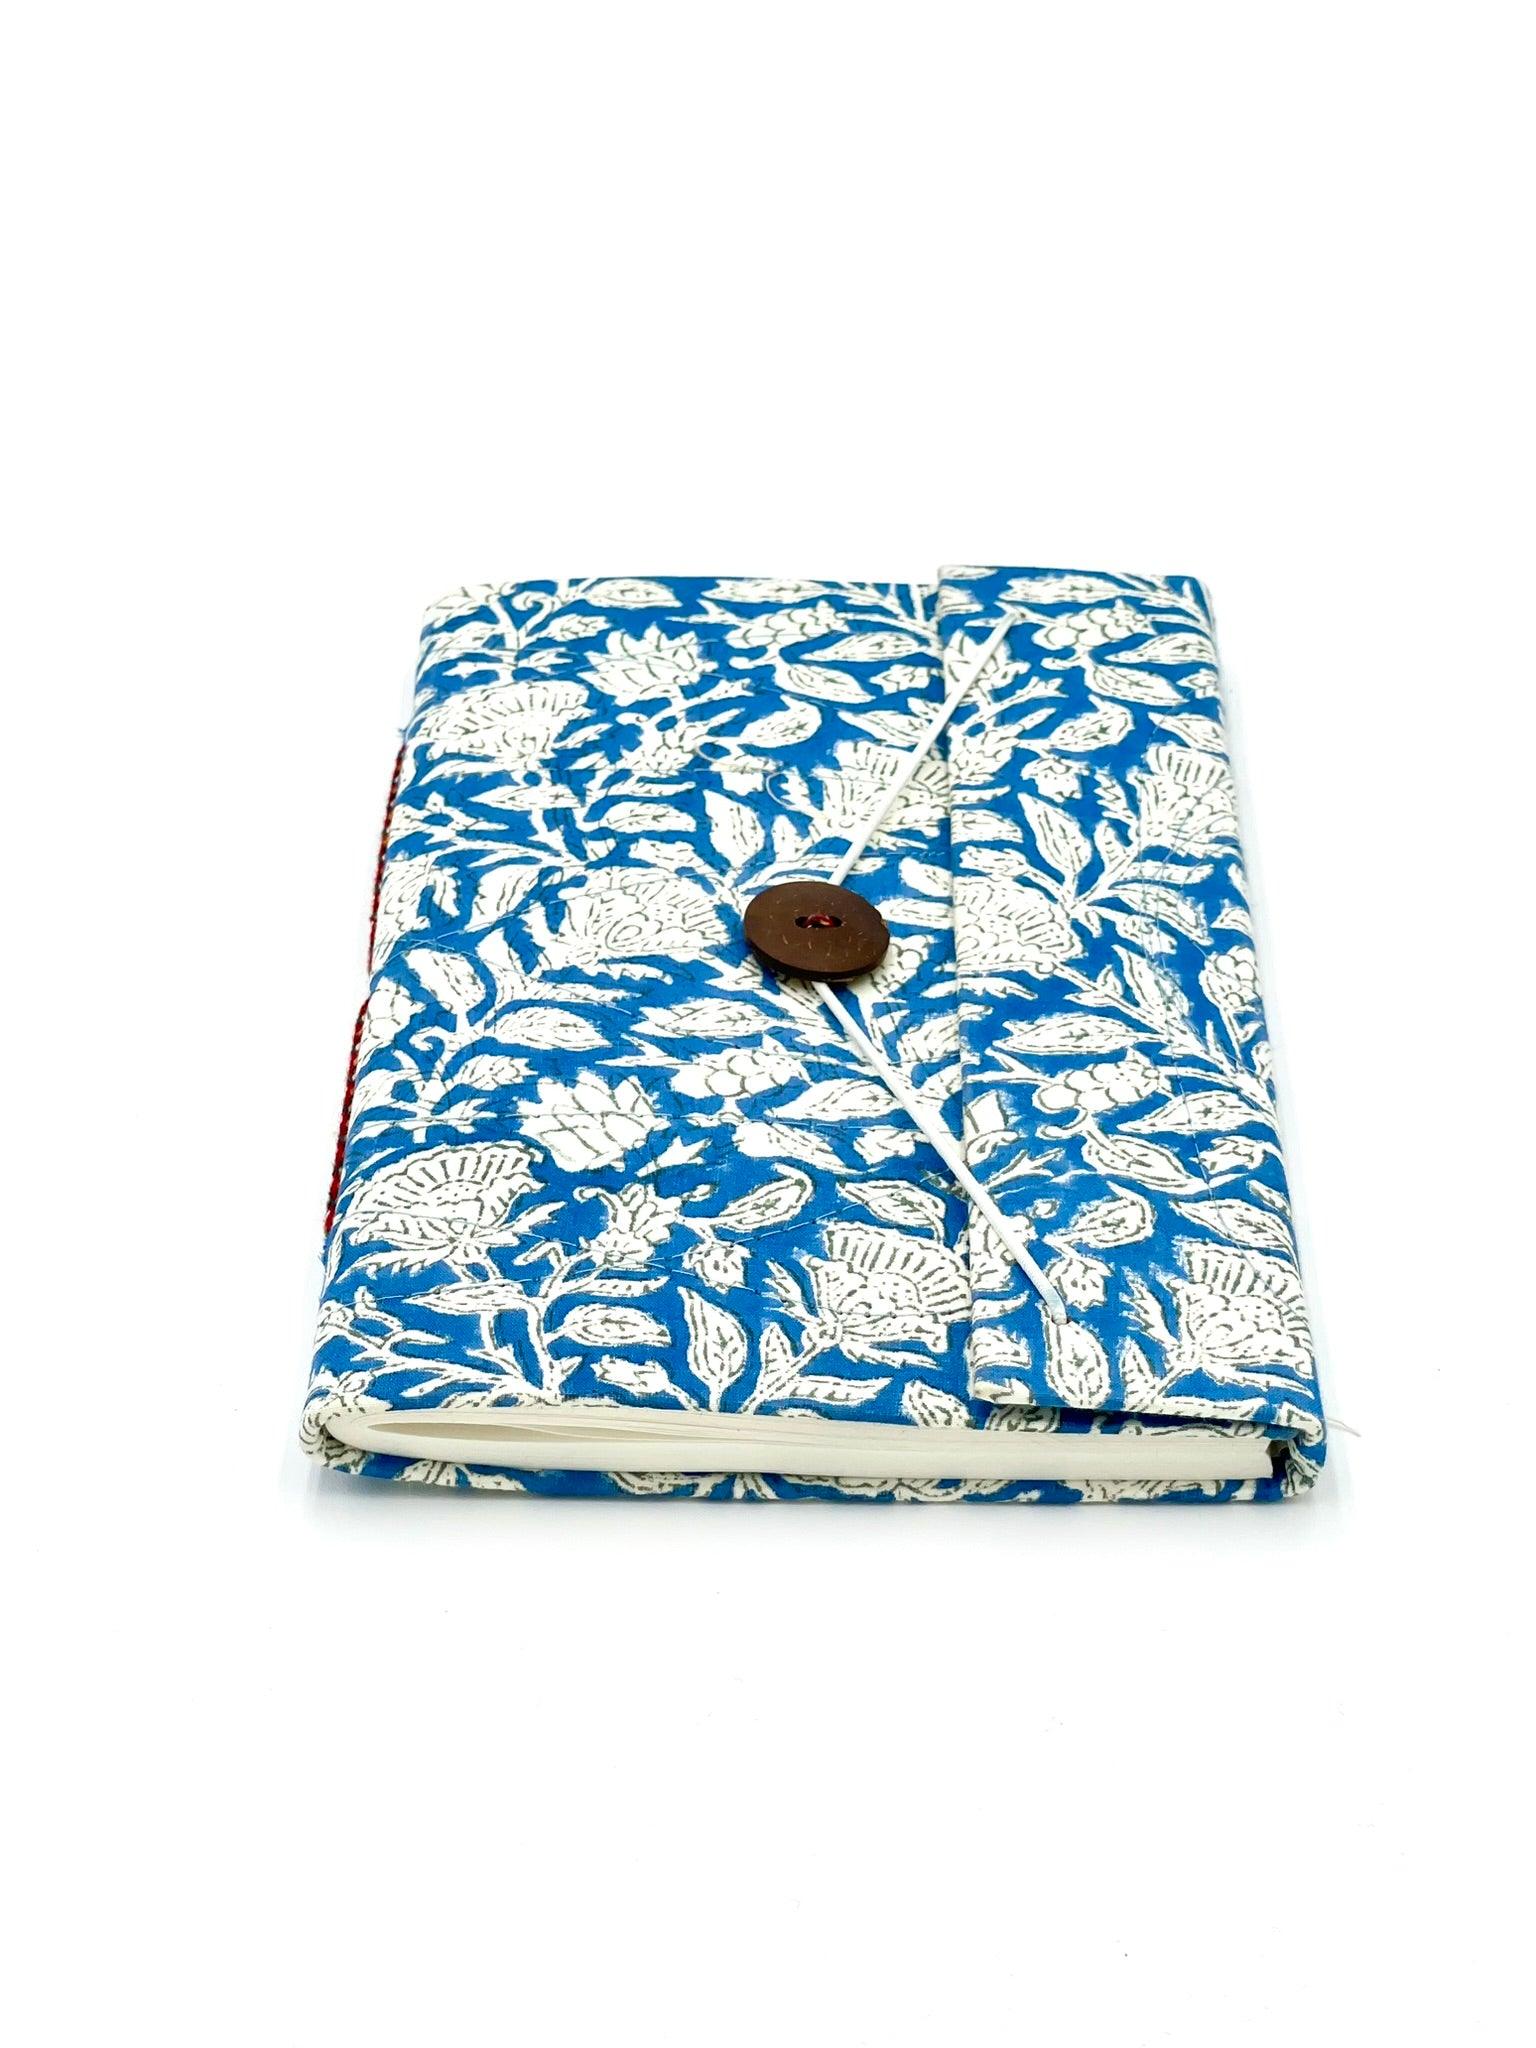 Block Print Journal/Notebook, Mediterranean Blue & White Floral - Unlined, 100 Pages, Thick Paper, Hard Cover - Transcend